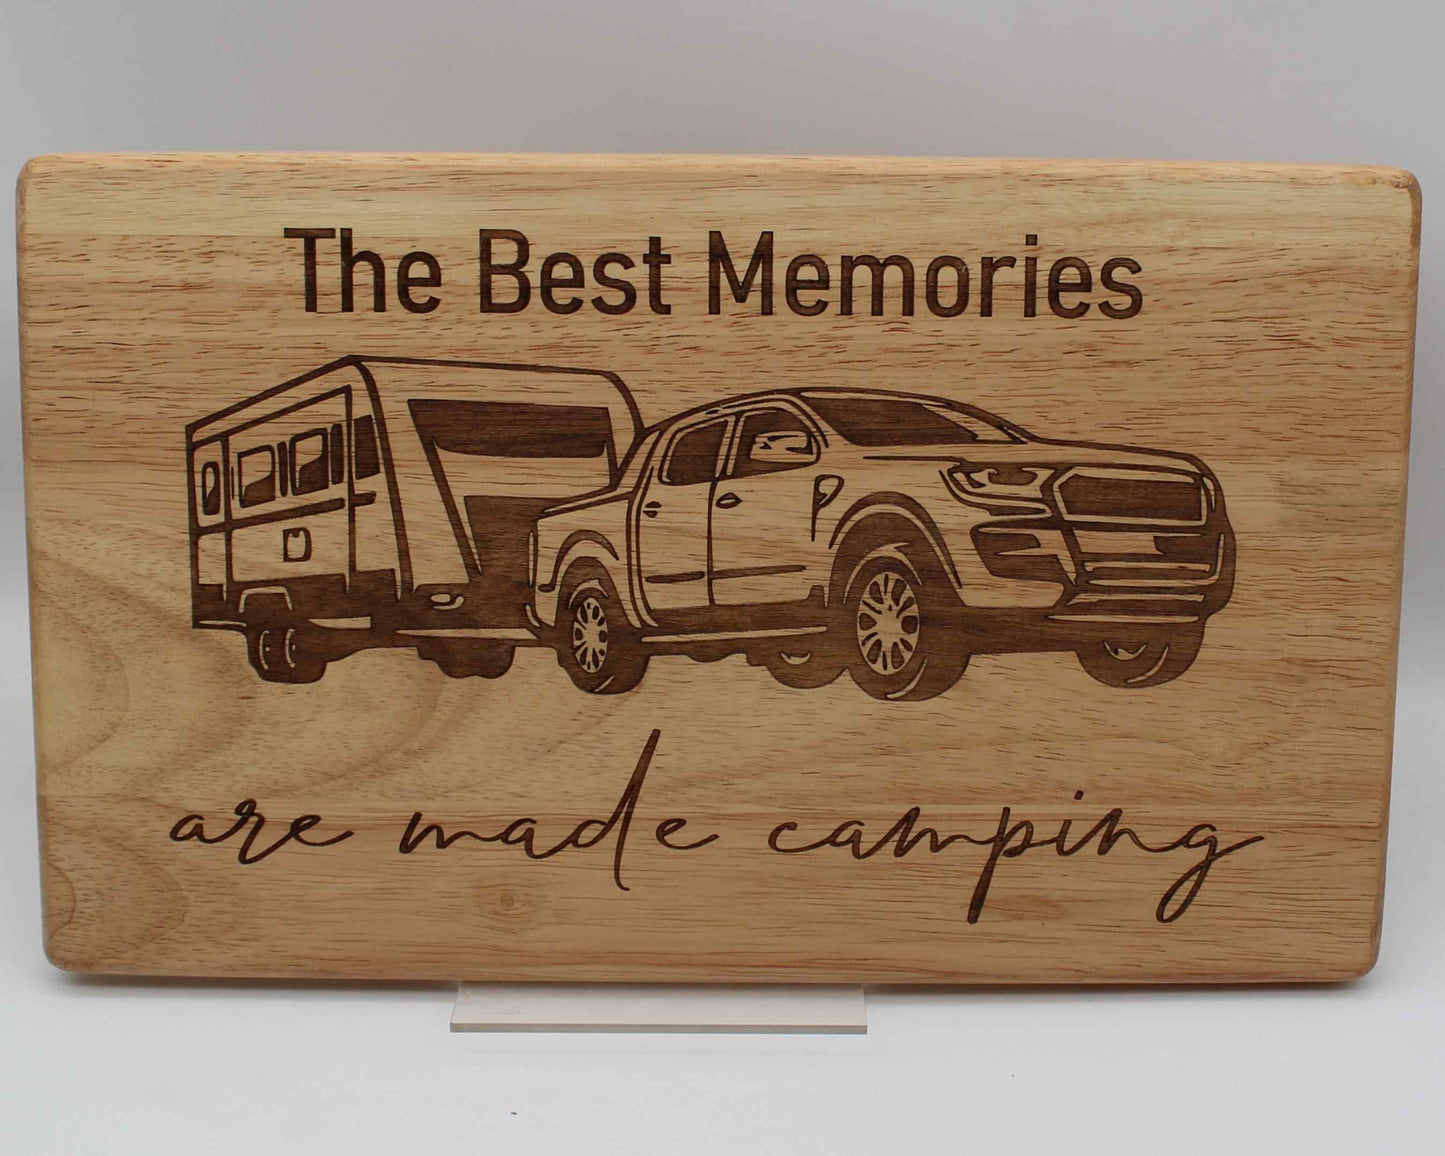 Caravan Chopping board - The Best Memories Are Made Camping